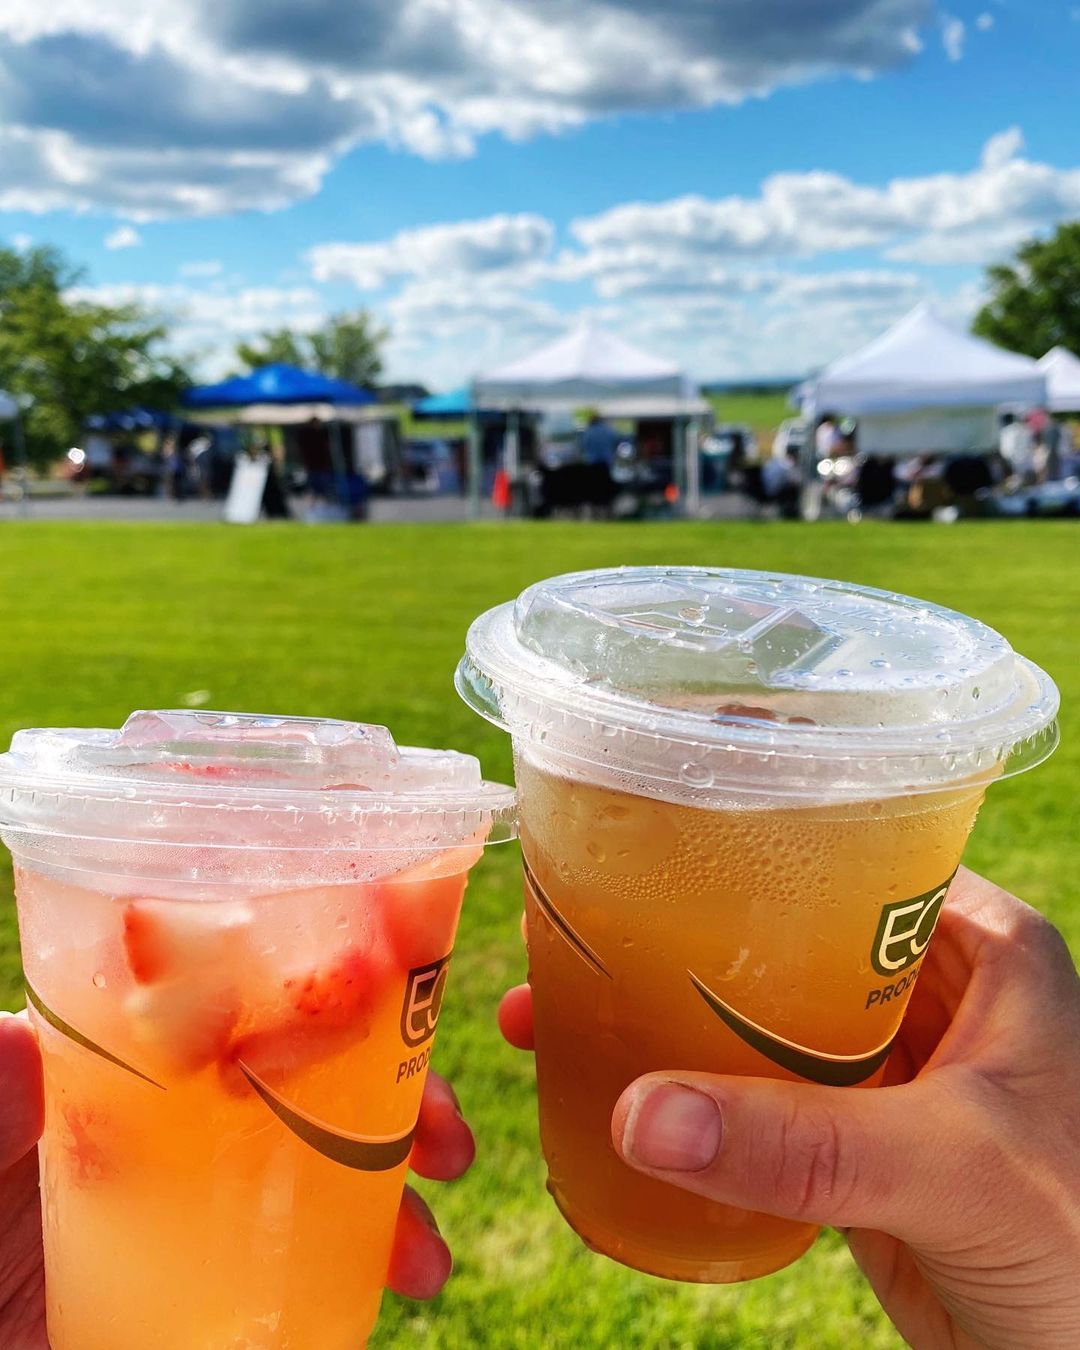 This weather has us dreaming about the 2021 Farmers Market season 